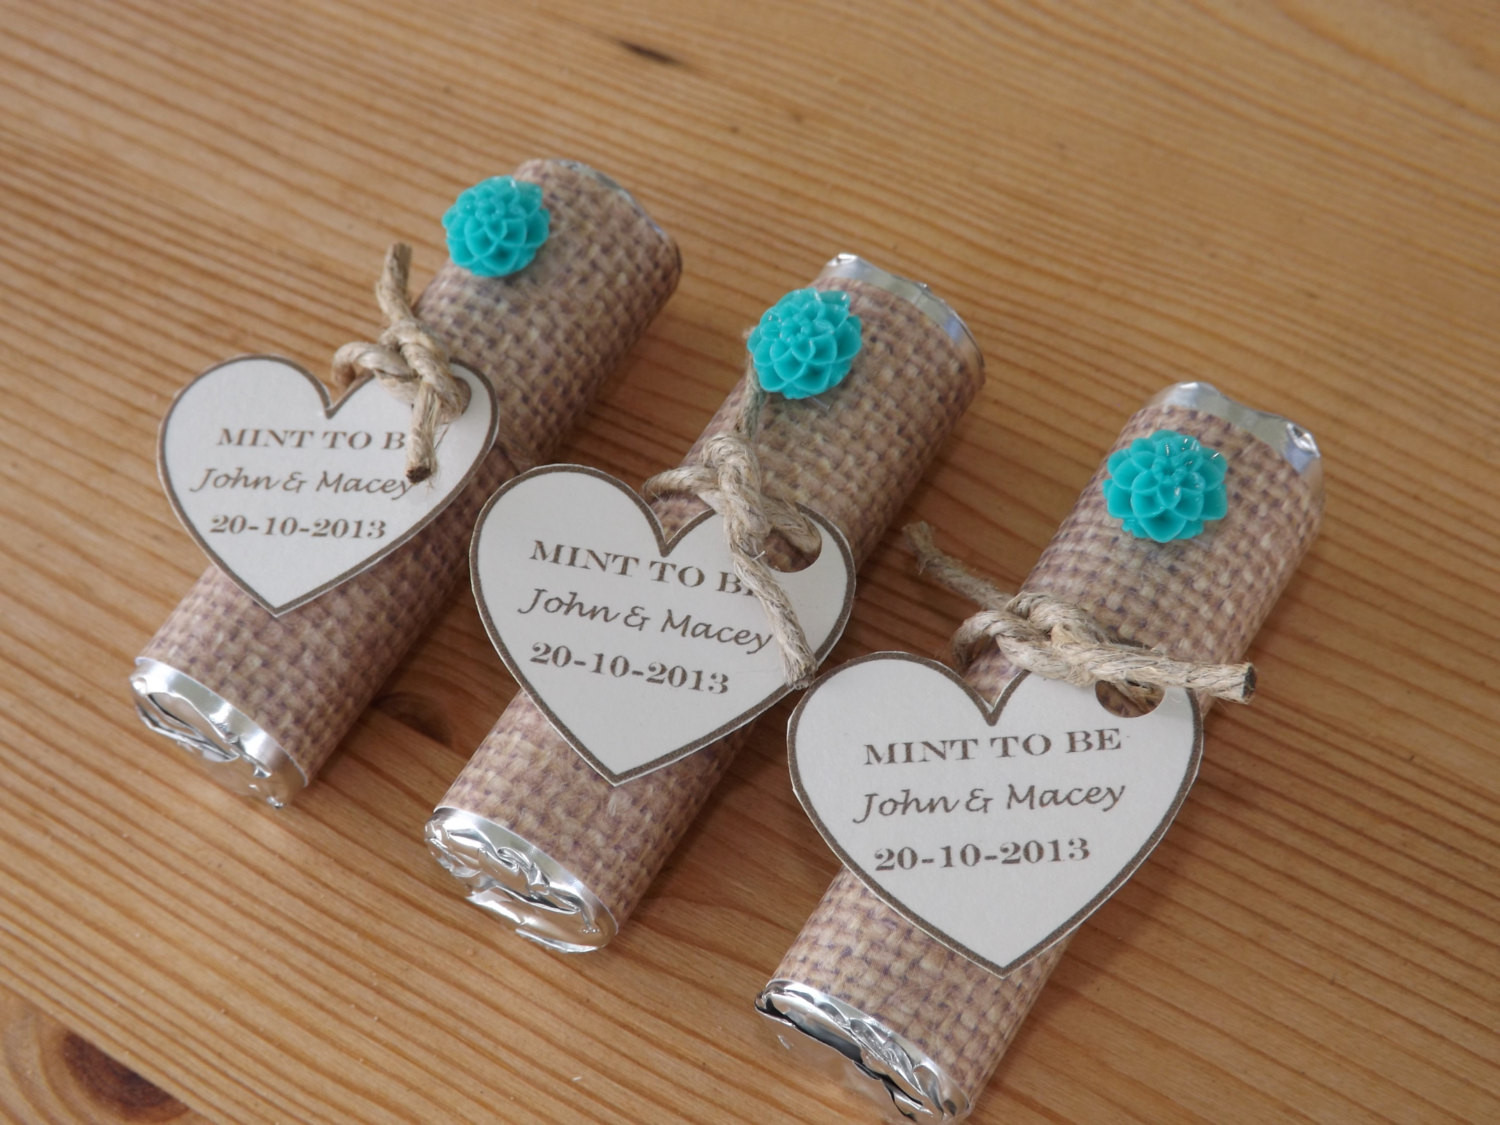 Wedding Shower Favors
 Mint to be Favors Wedding Bridal Shower by